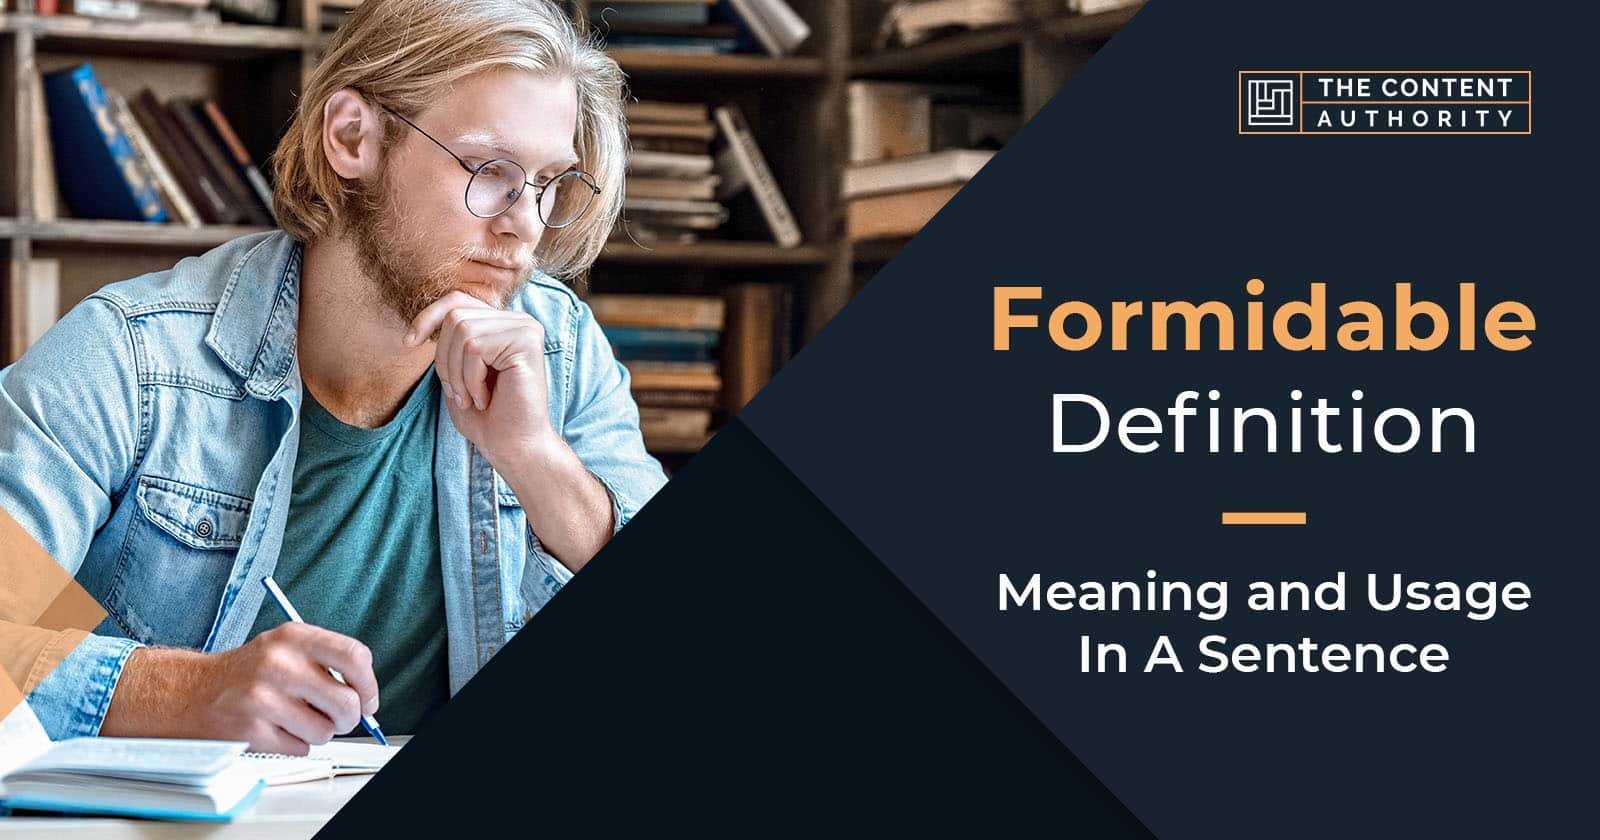 Formidable Definition – Meaning and Usage in a Sentence